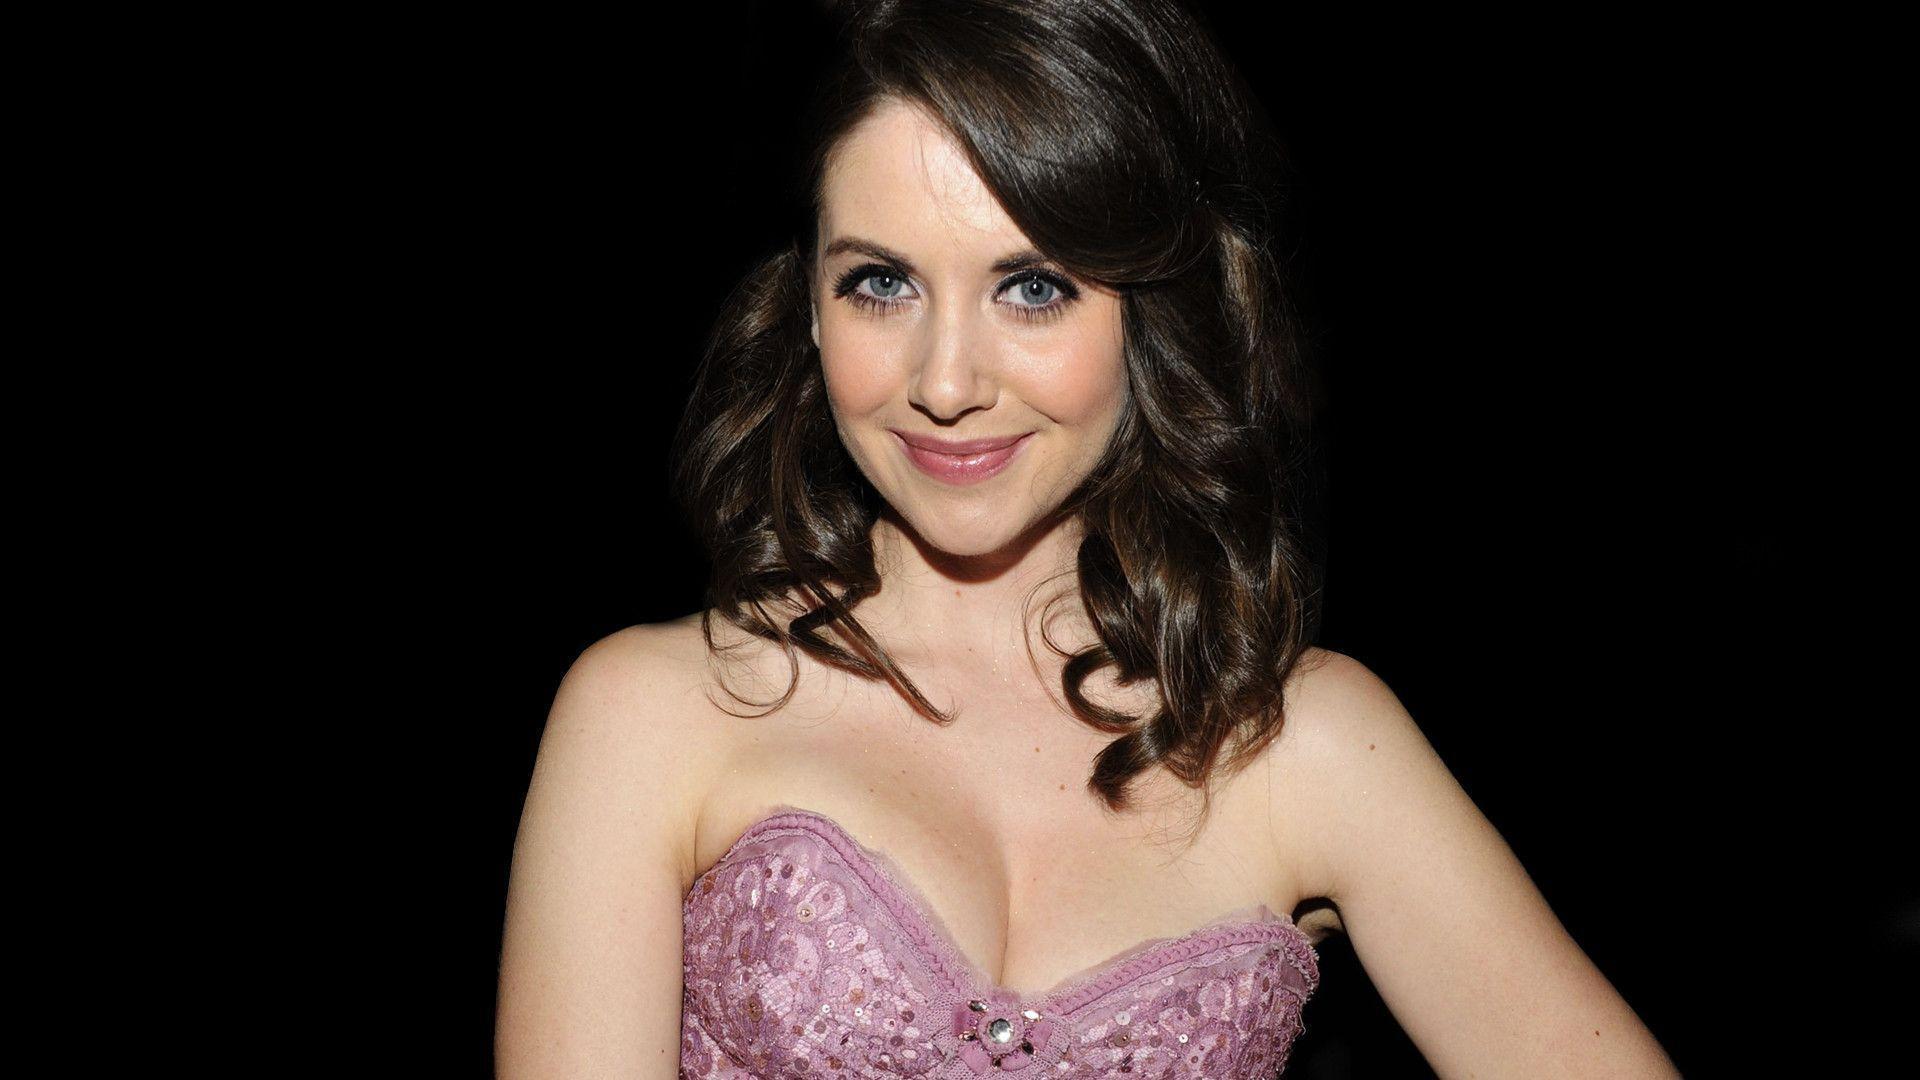 Alison Brie wallpaper High Resolution and Quality Download